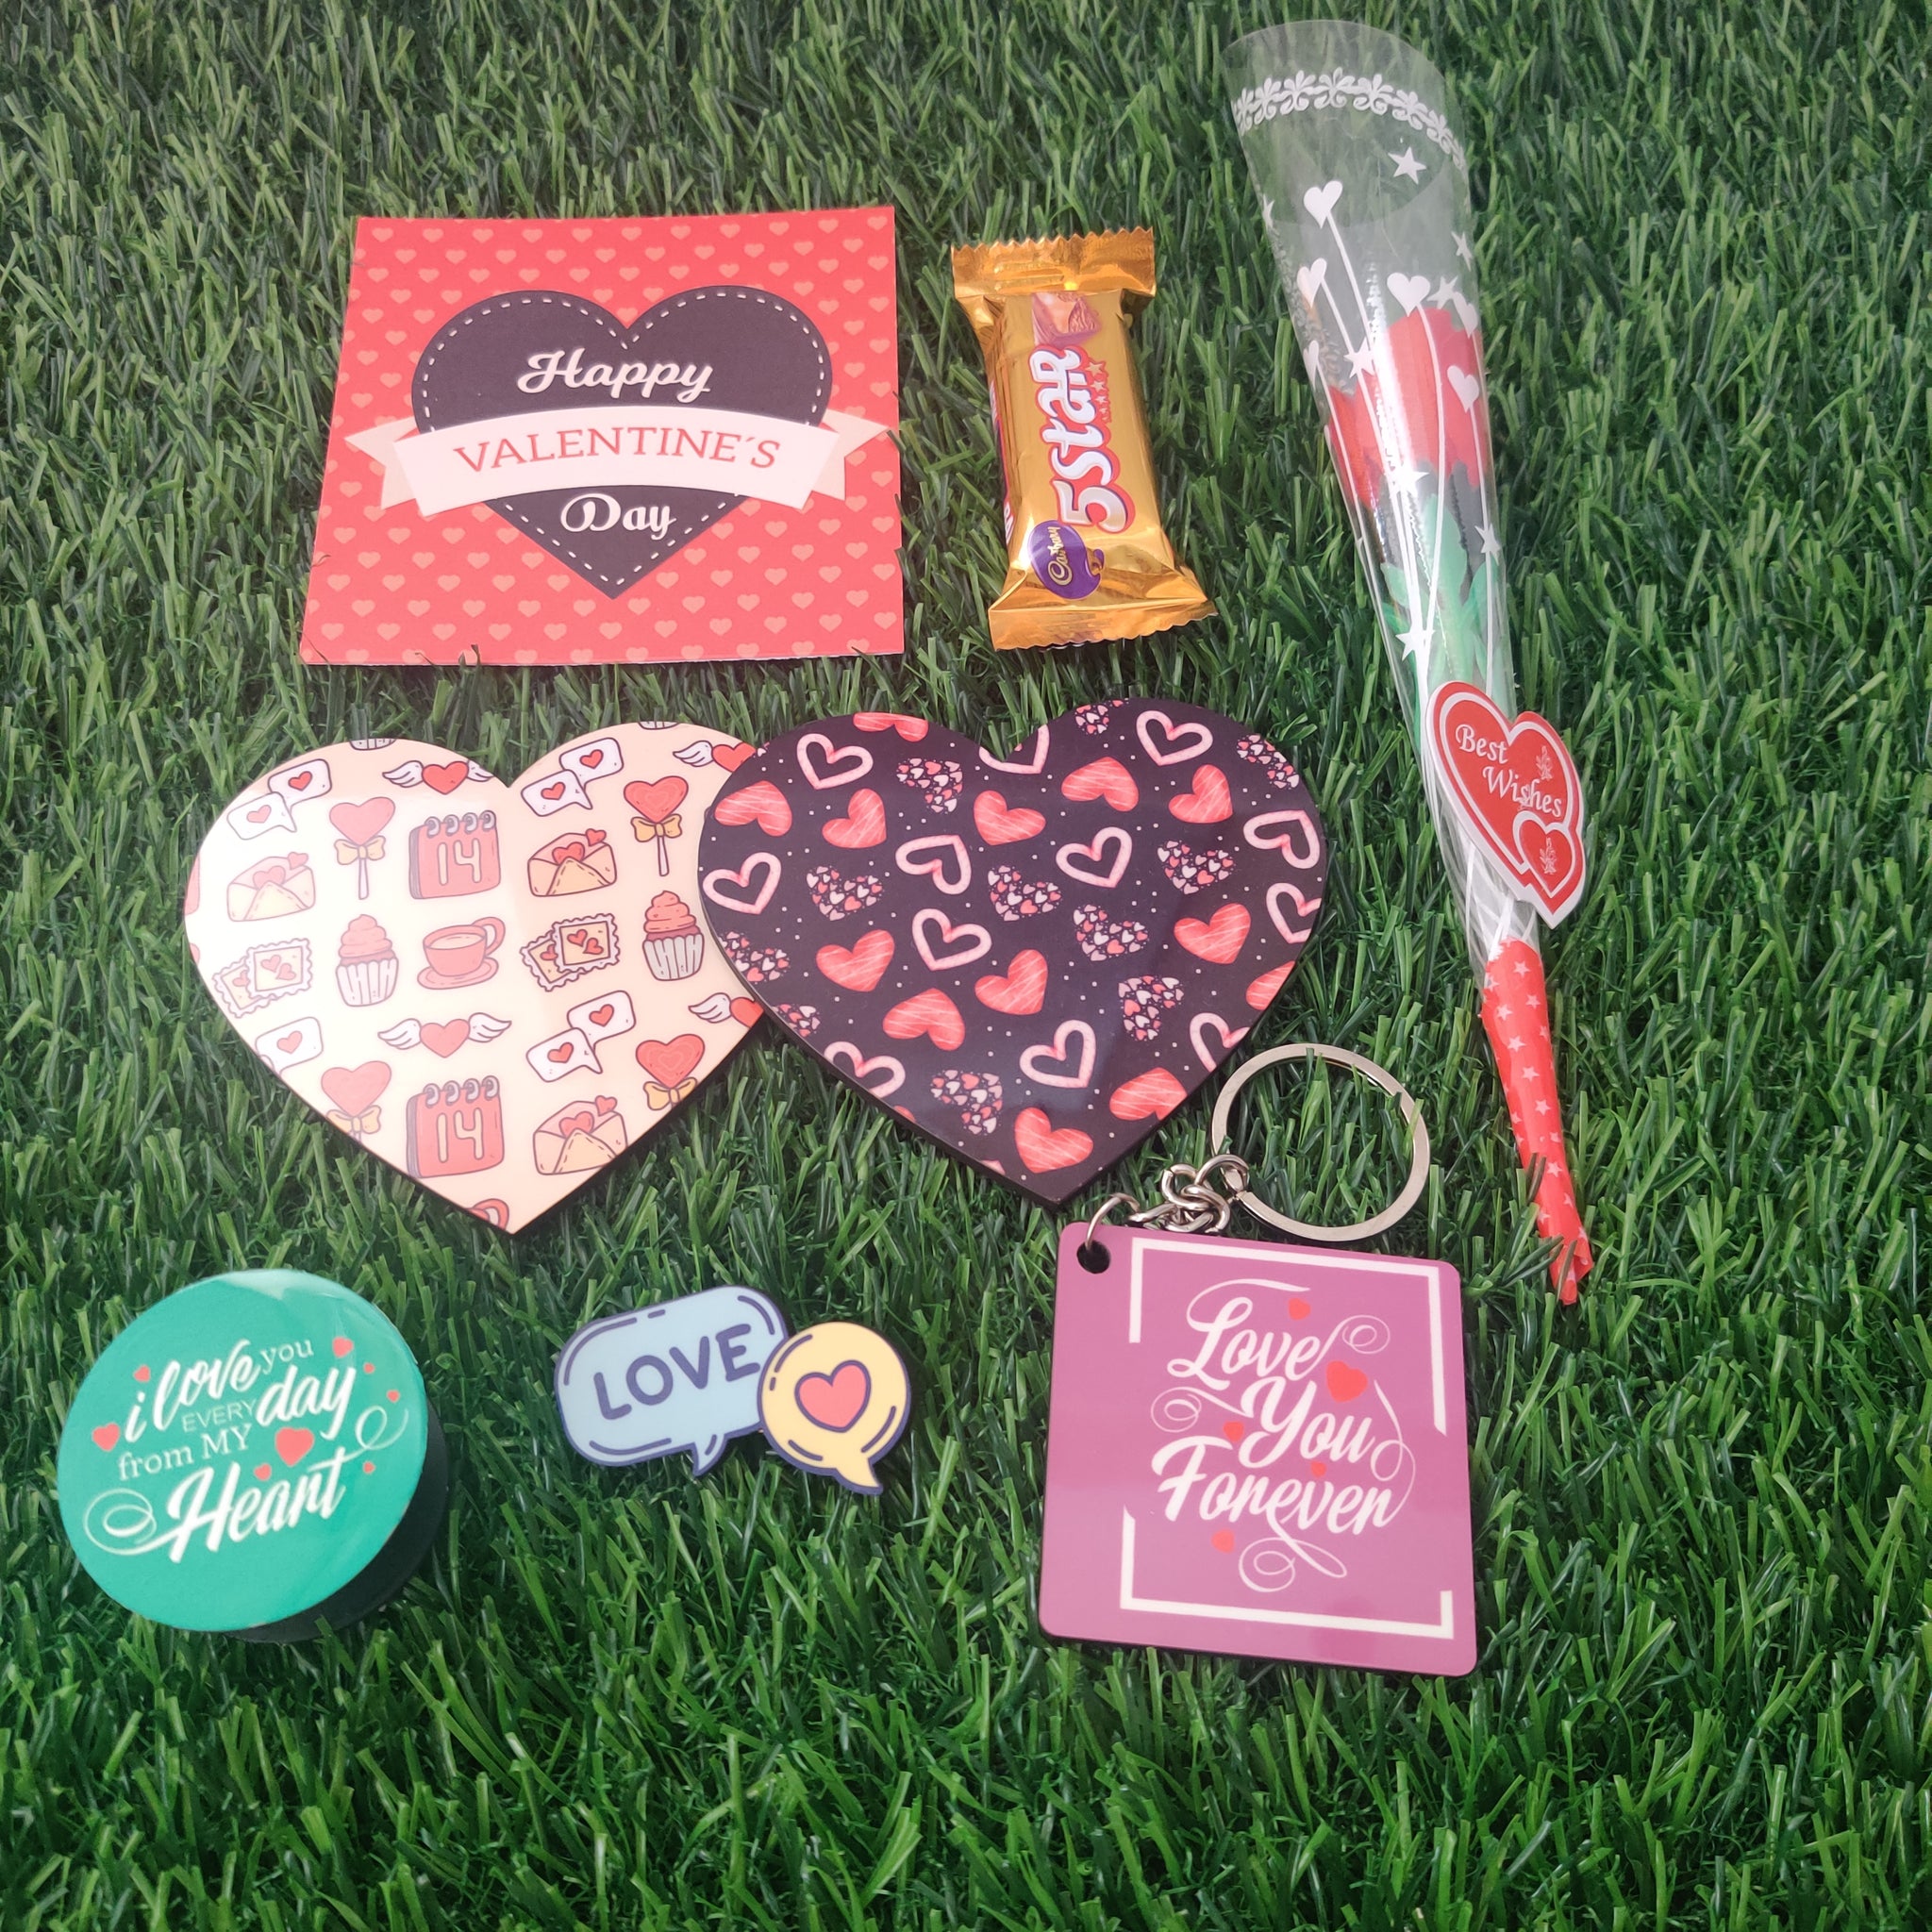 Valentine Gift Box (Hamper No 4) - 7 products (Coaster , Pop Socket, Keychain, Lapel Pin, Card, Chocolate and Rose)